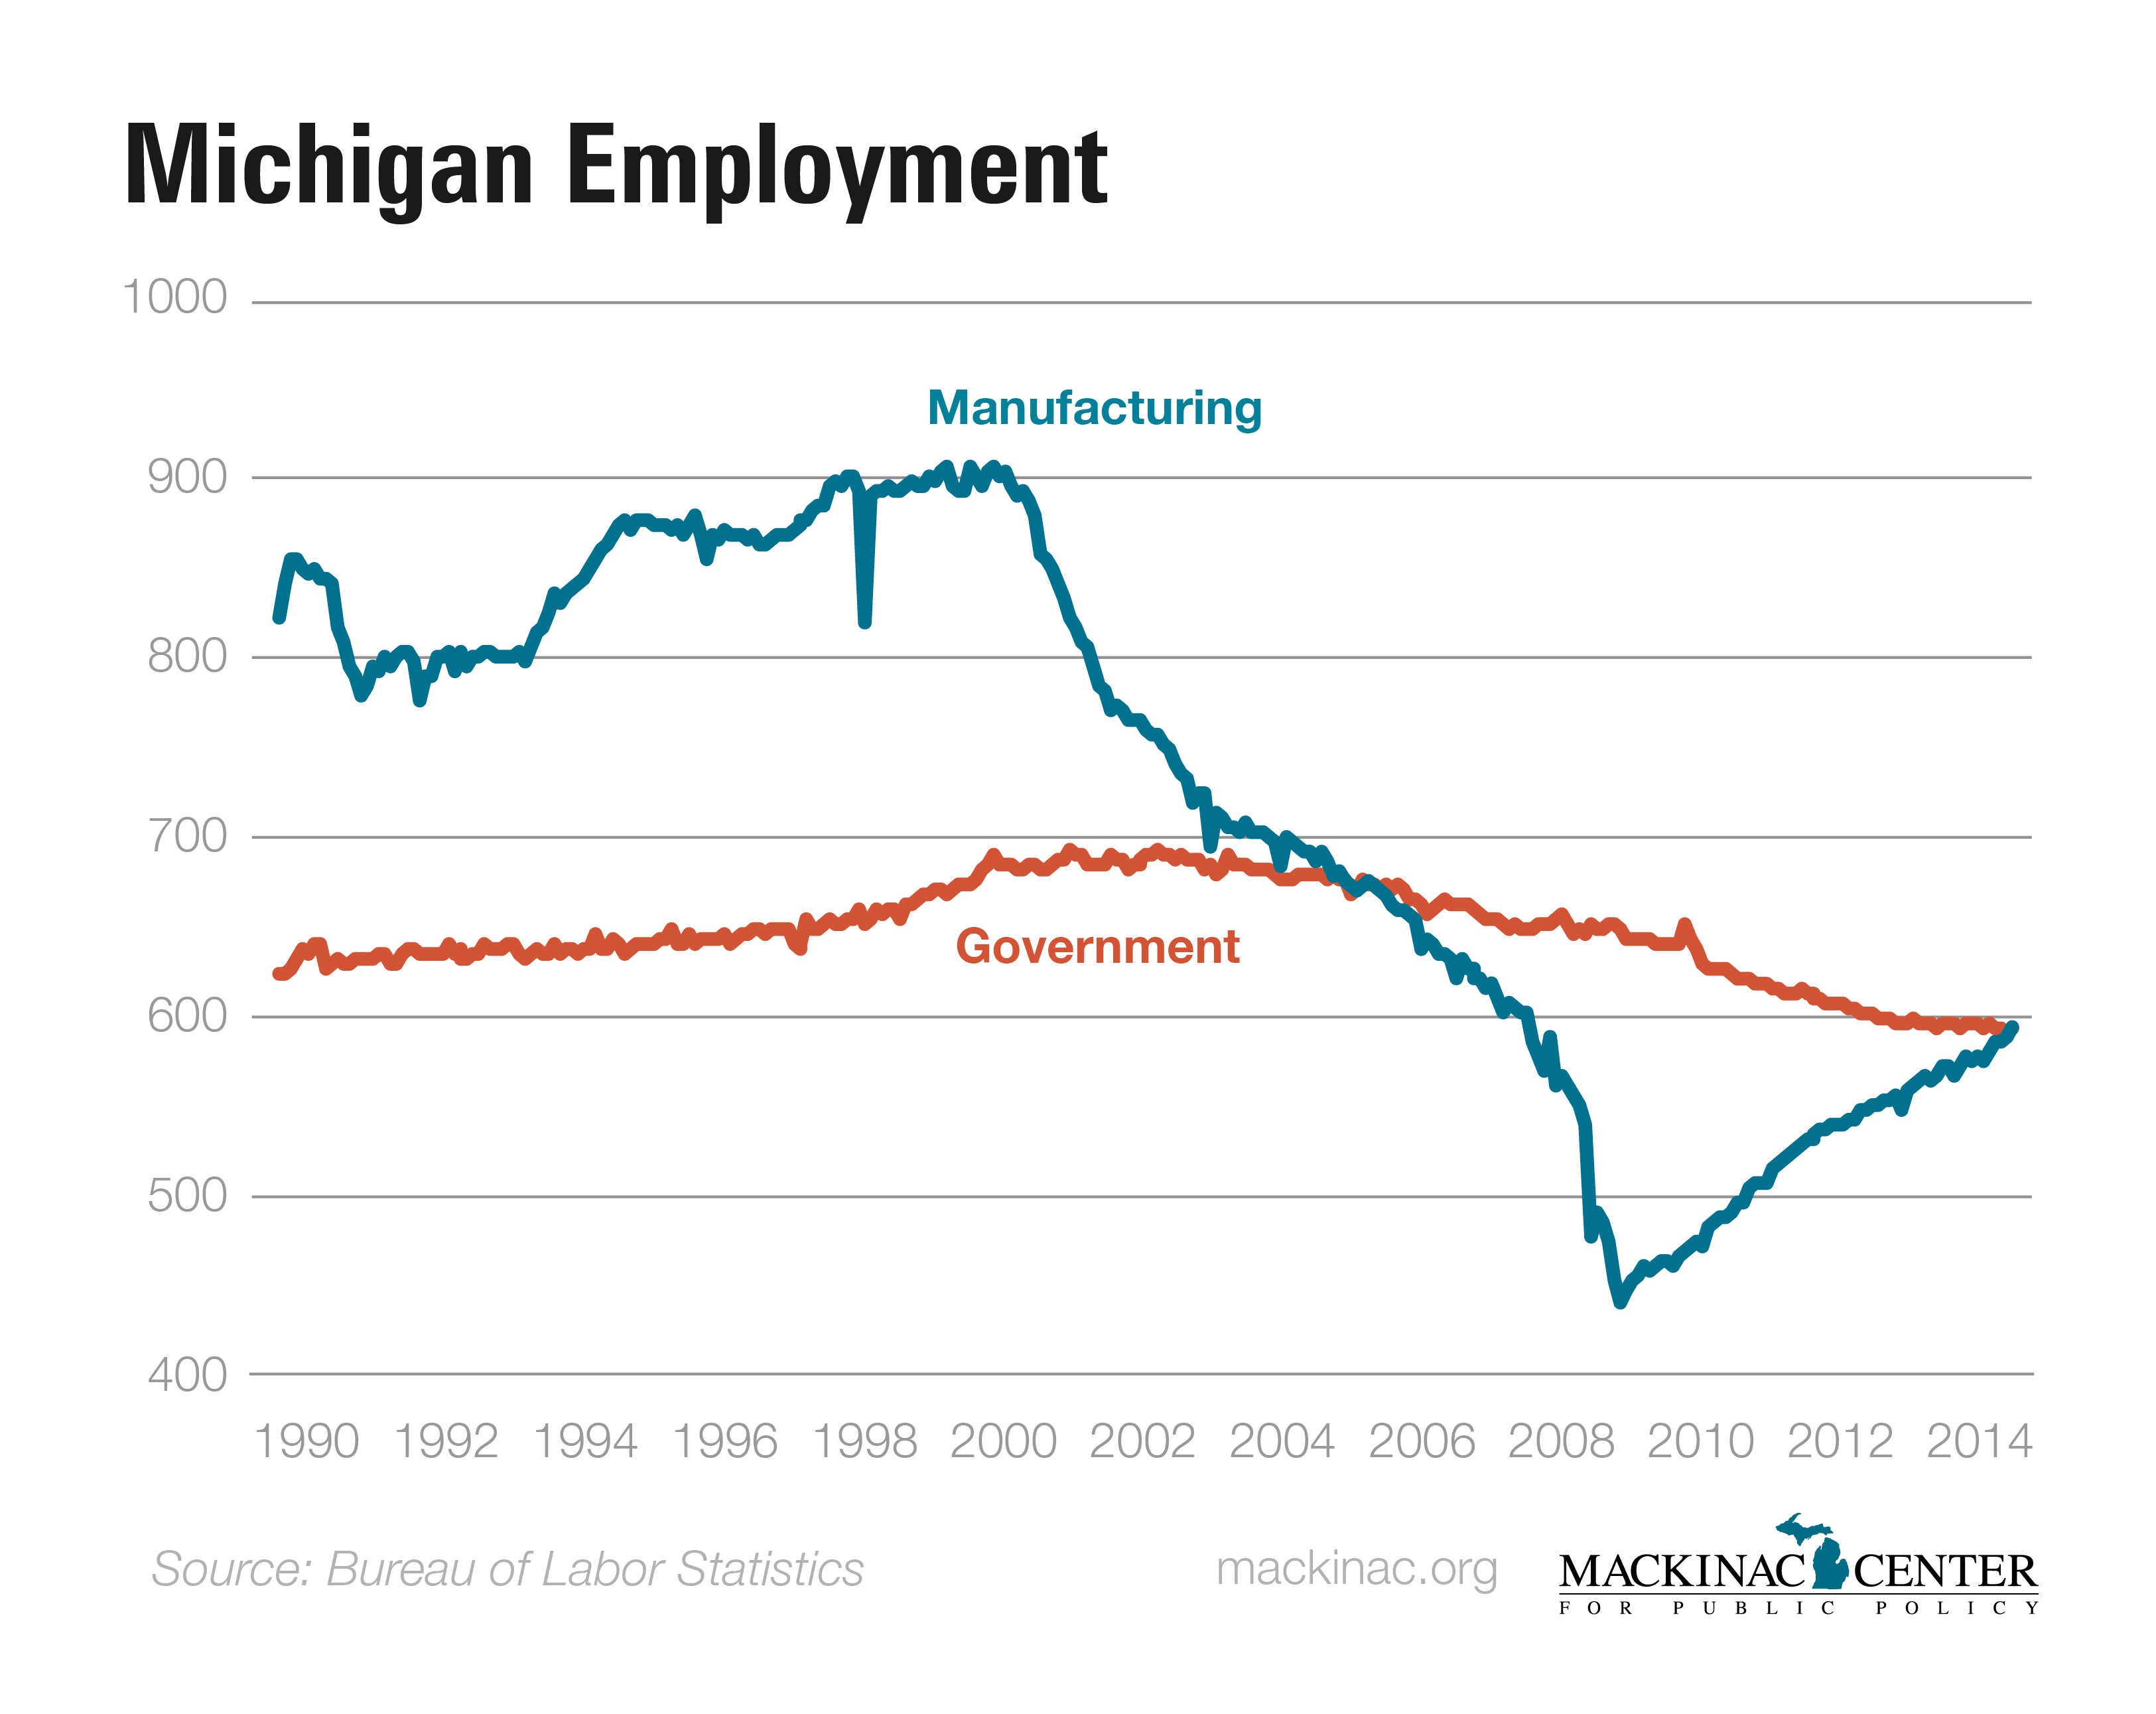 Manufacturing Jobs Set to Surpass Government Jobs in Michigan for First